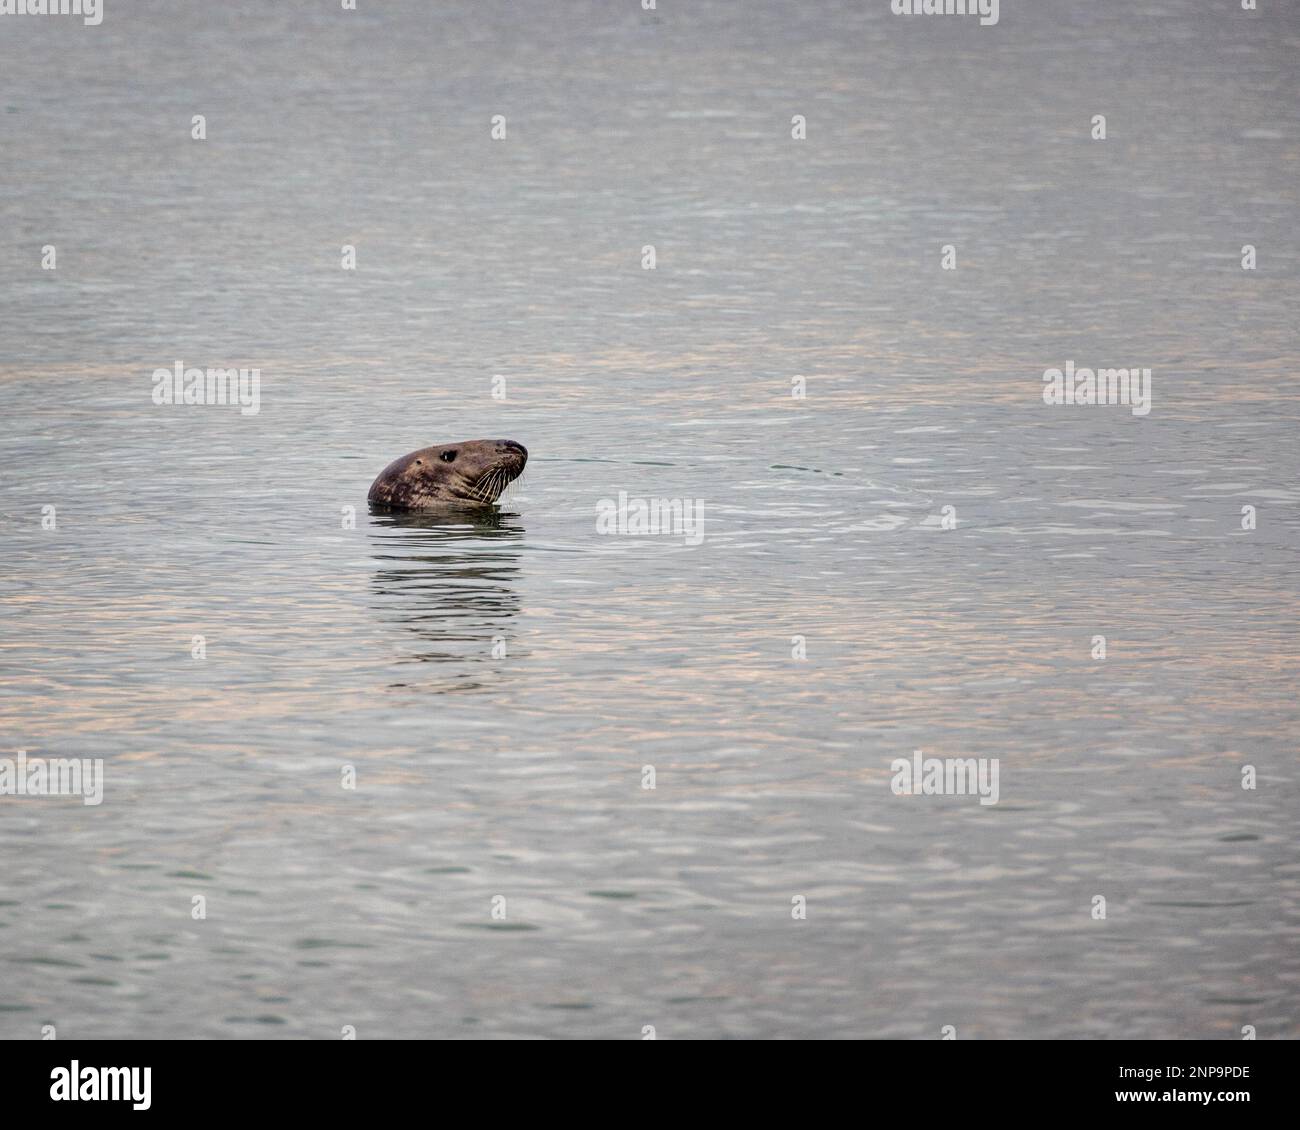 A common seal swimming off the coast at Worthing, West Sussex, UK Stock Photo